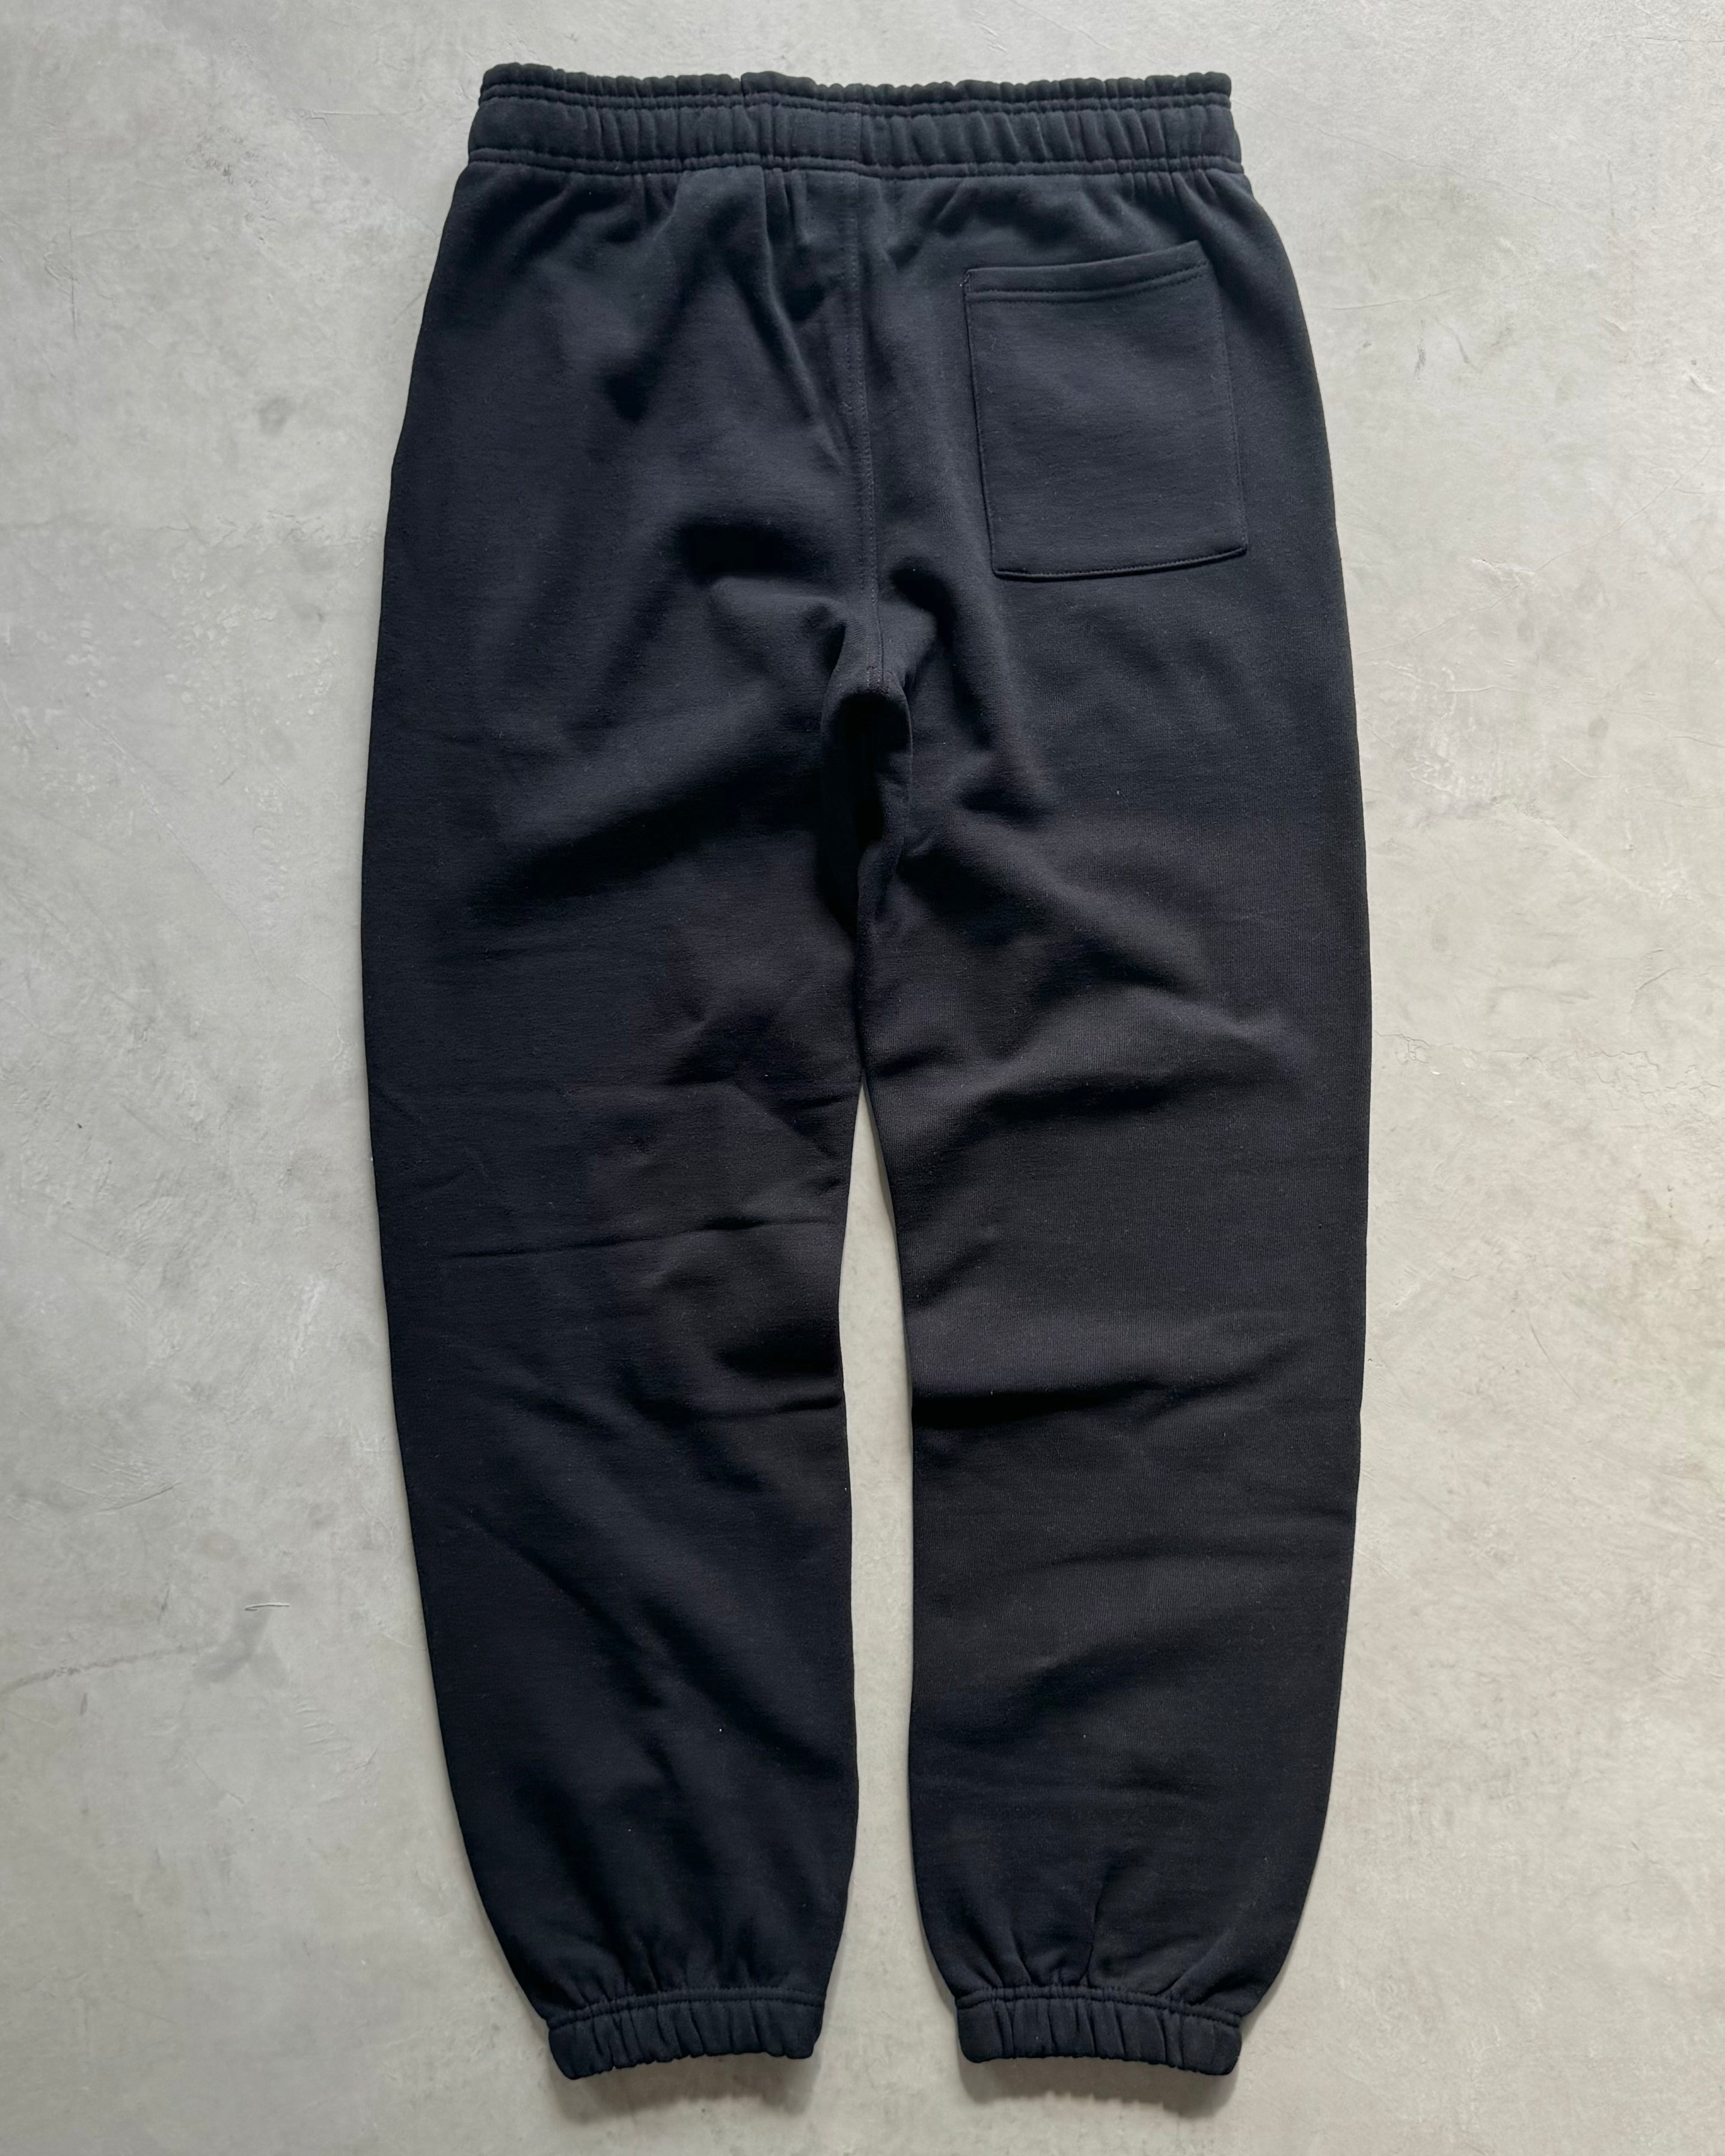 TODAY edition / MY PACE #01 Sweat Pants - BLACK